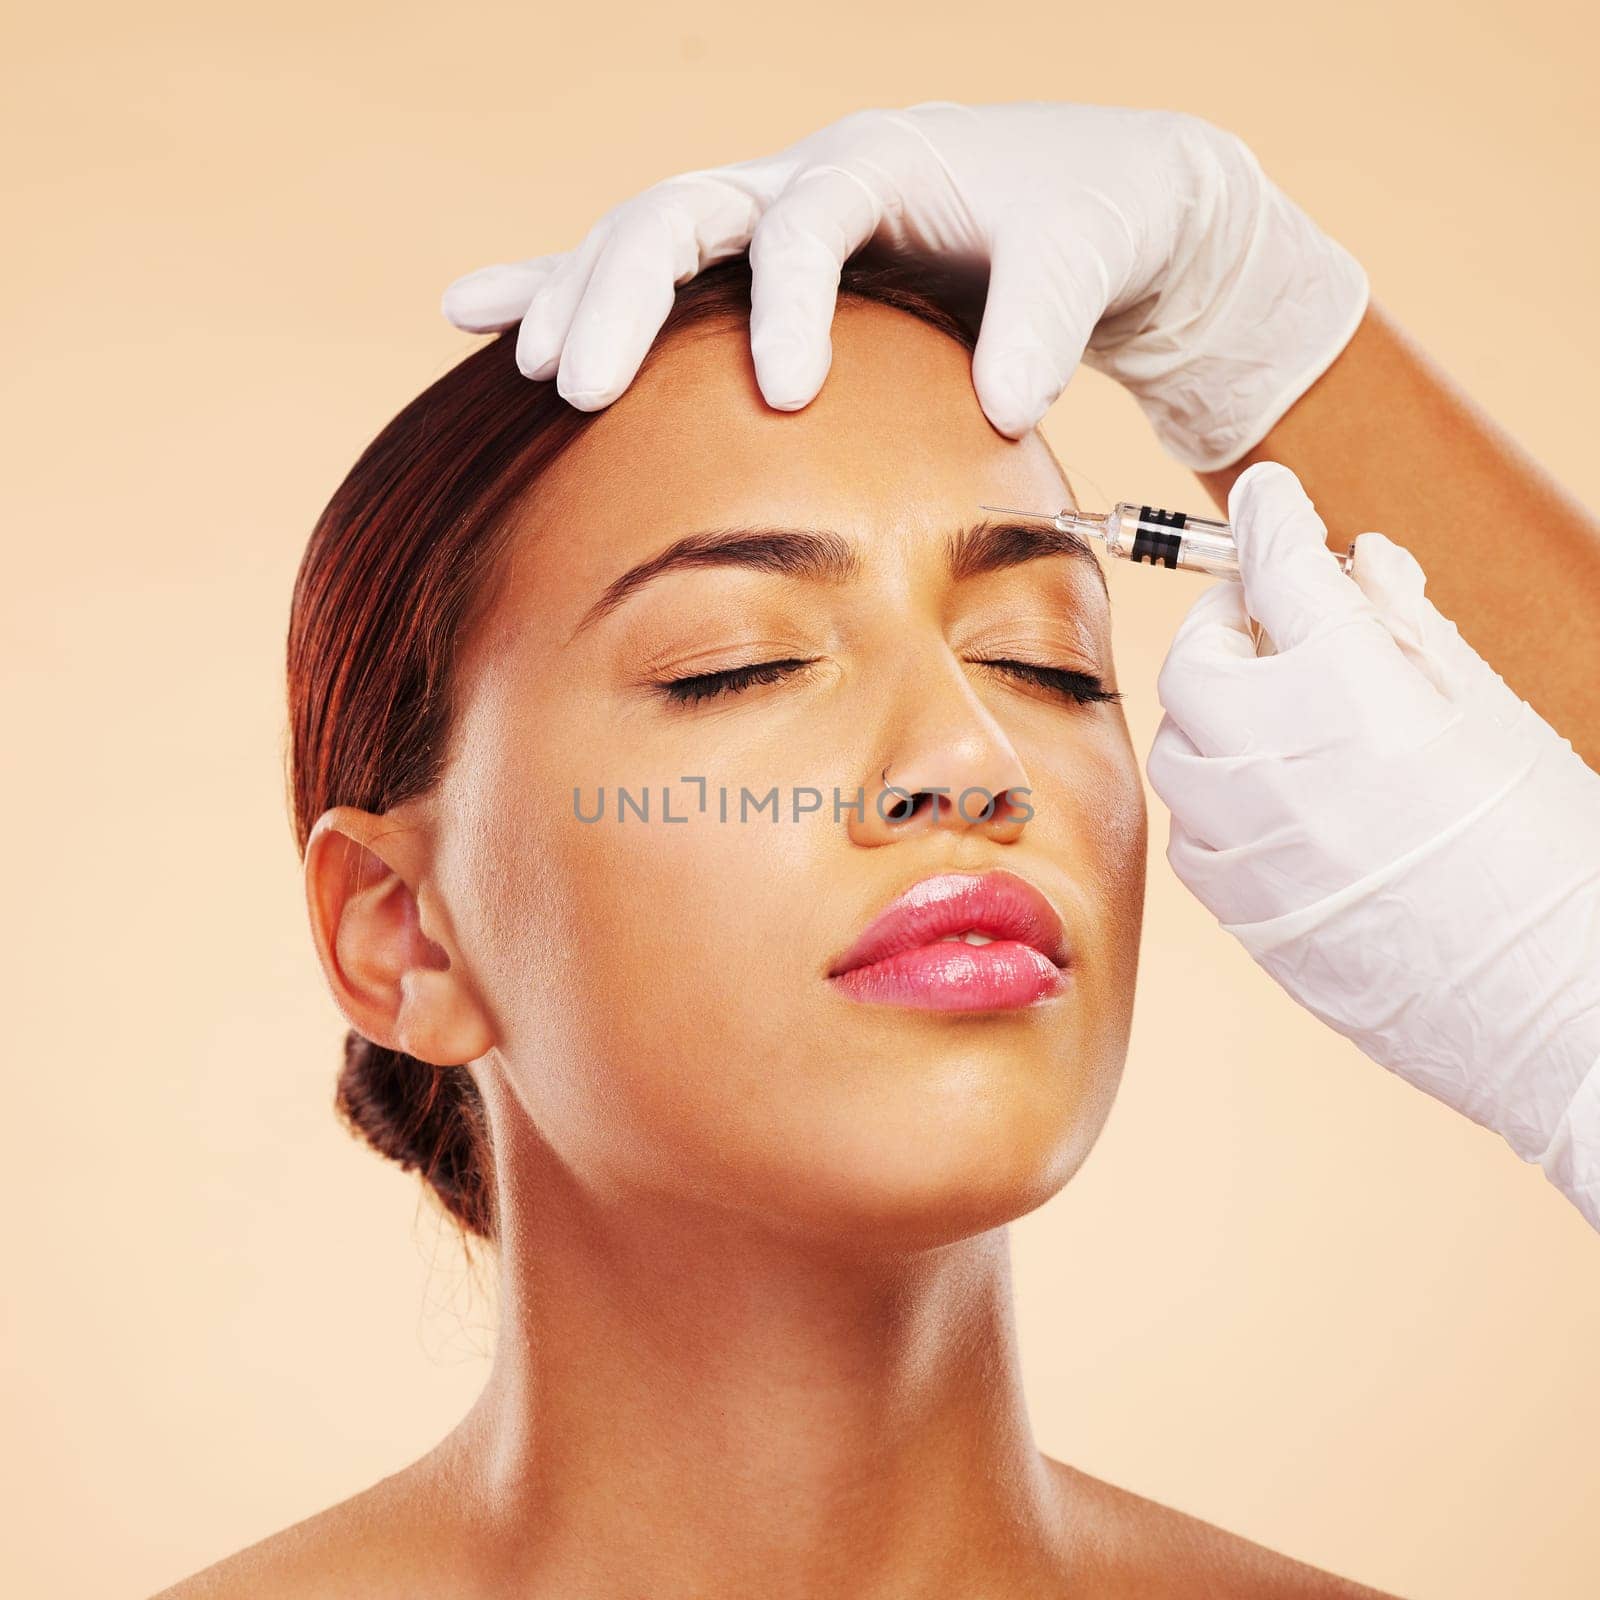 Hands, woman or plastic surgery with needle on face for cosmetics isolated on studio background. Forehead pain, anti aging or girl model with injection, dermatology and beauty with medical procedure.